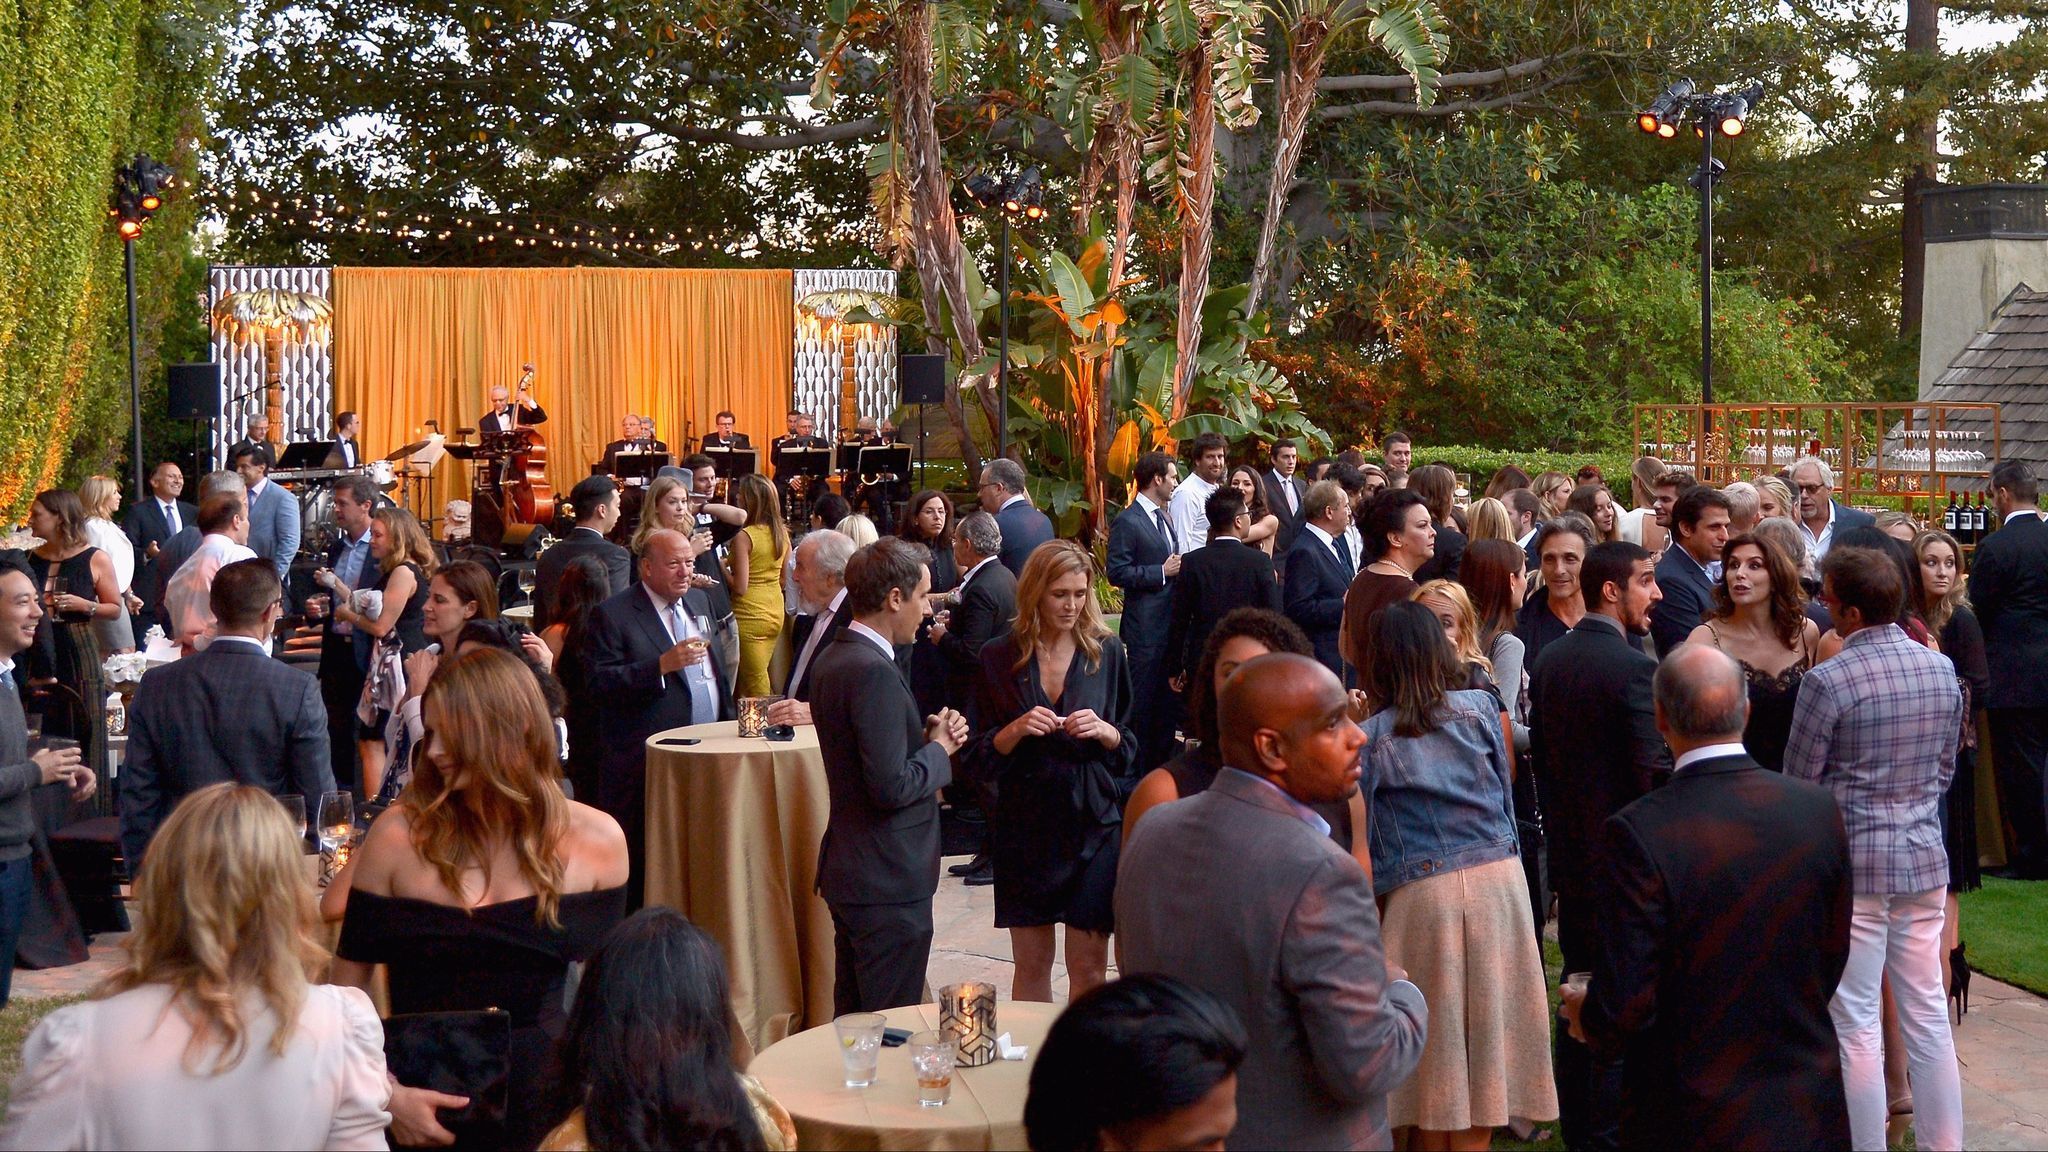 Guests attend an event for United Nations Secretary-General Ban Ki-moon co-hosted by Brett Ratner at his home, Hilhaven Lodge, in 2016.